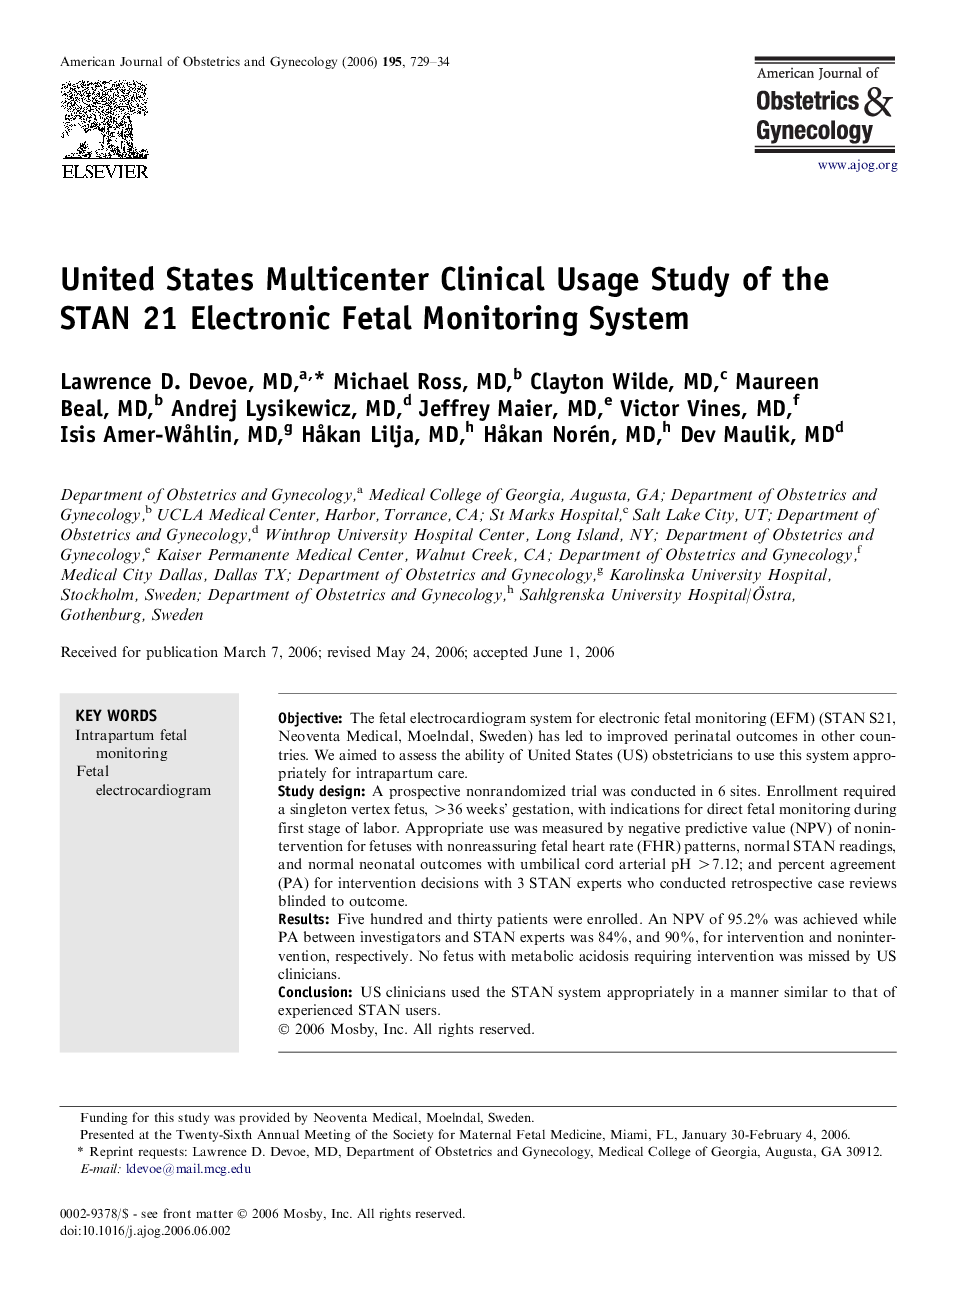 United States Multicenter Clinical Usage Study of the STAN 21 Electronic Fetal Monitoring System 